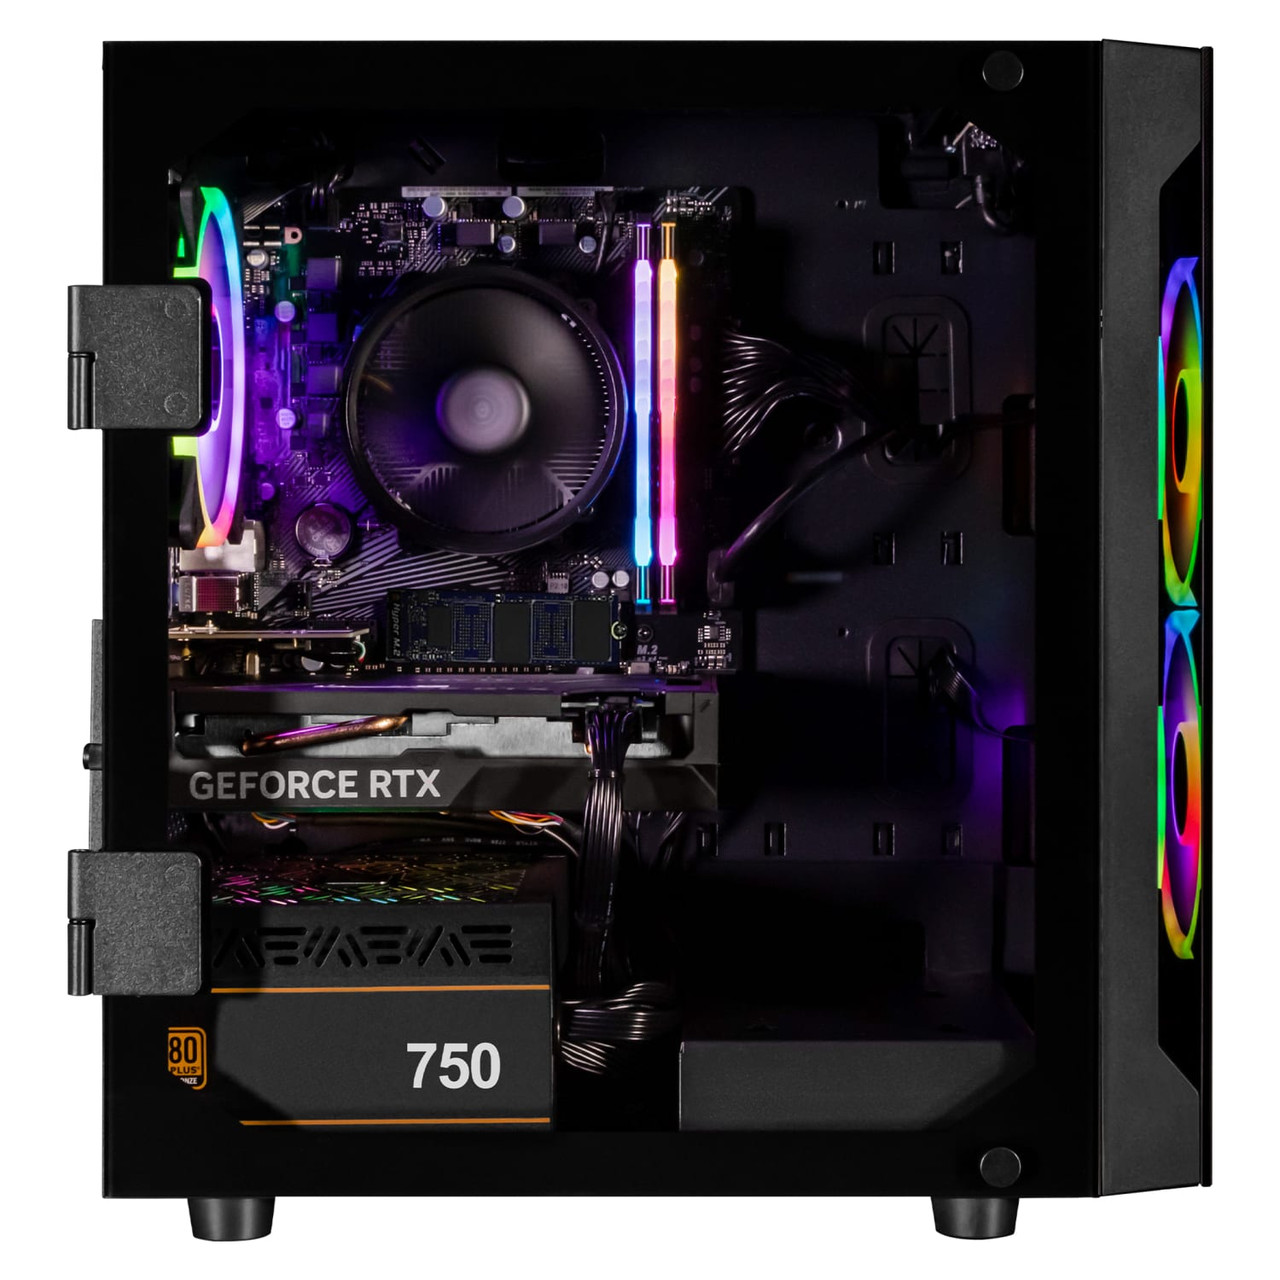 Skytech's RTX 4060 Ti-powered gaming desktop sees first discount